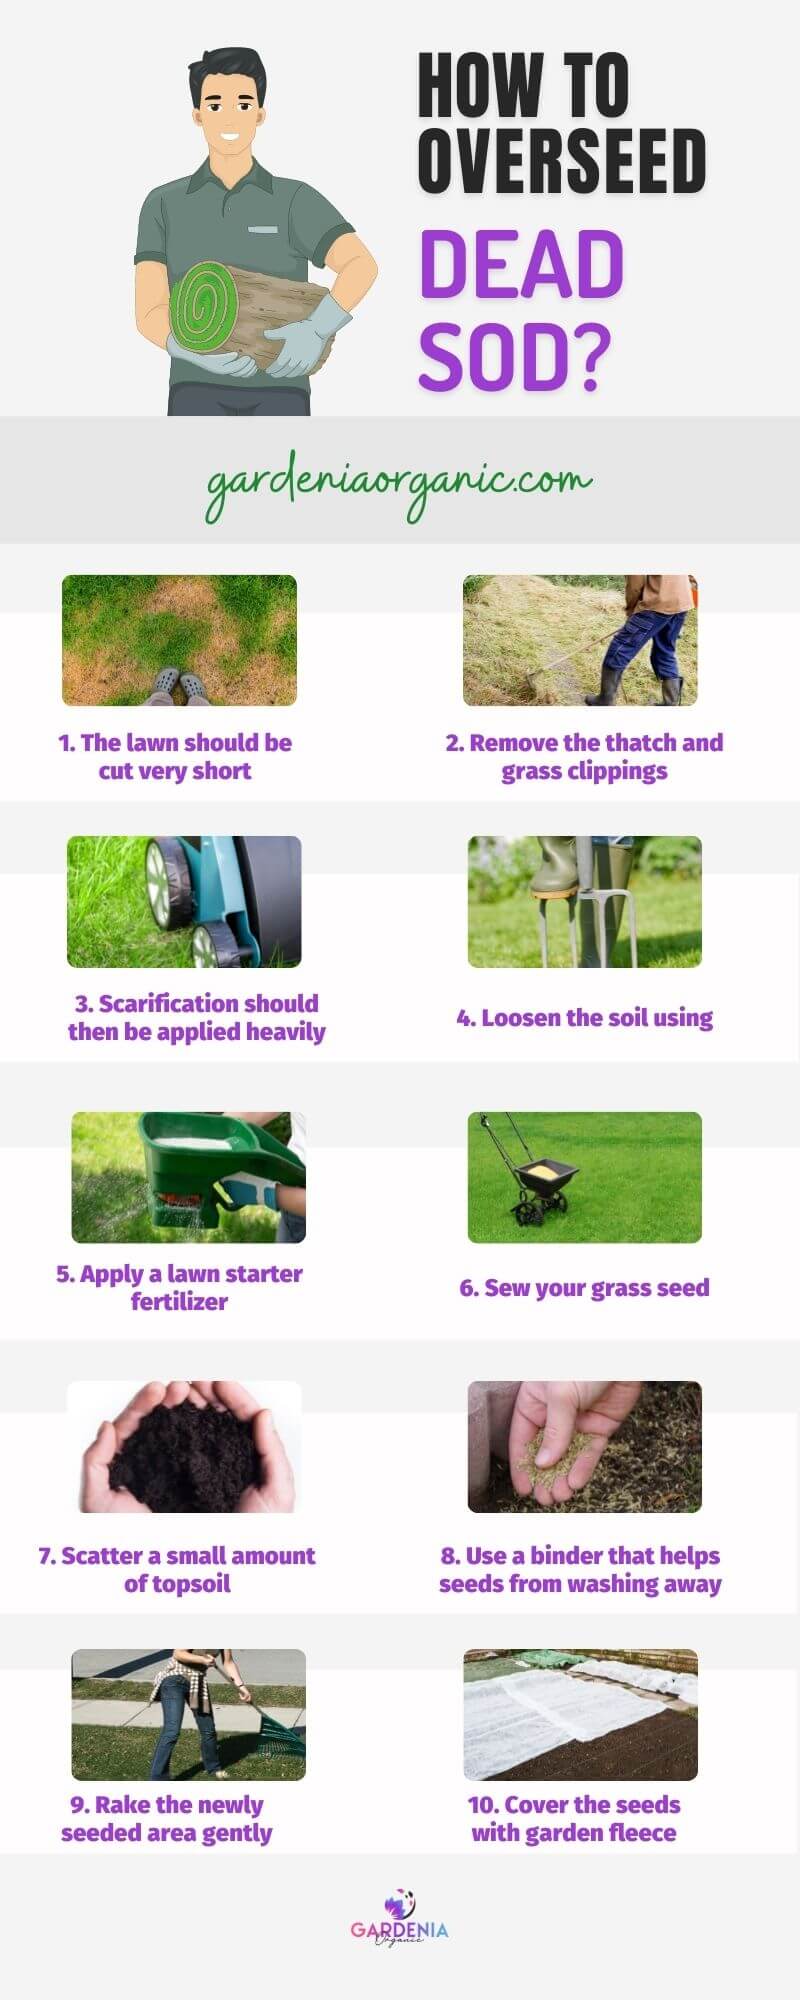 Steps on how to overseed dead sod